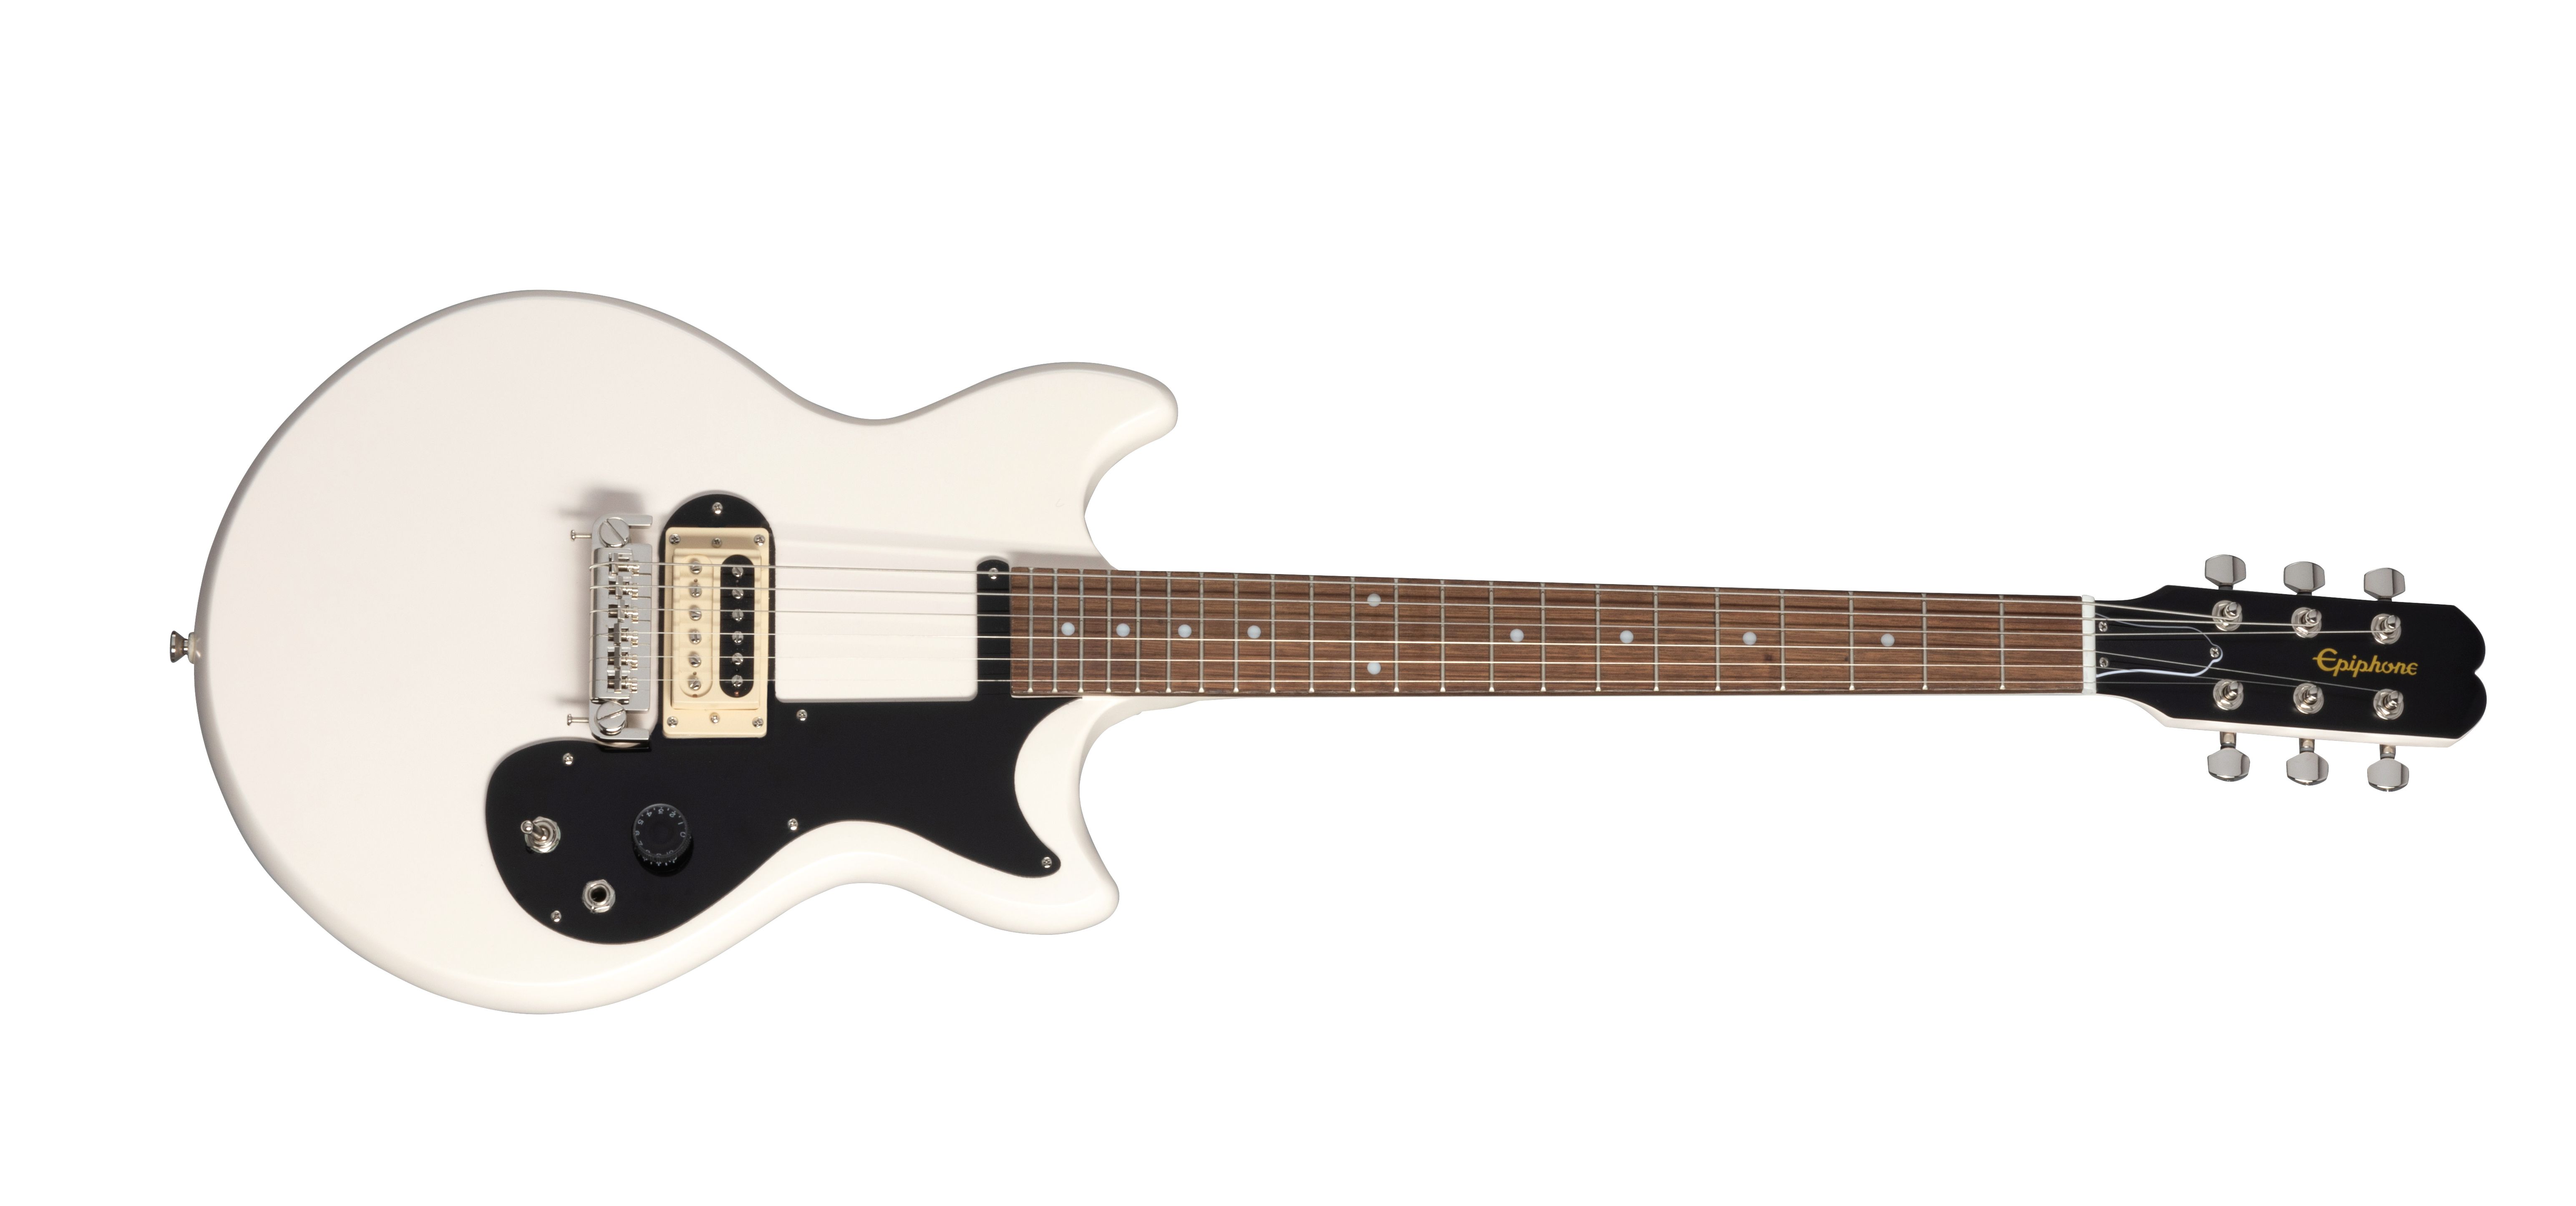 Chitare electrice - Chitara electrica Epiphone Joan Jett Olympic Special Aged Classic White
, guitarshop.ro